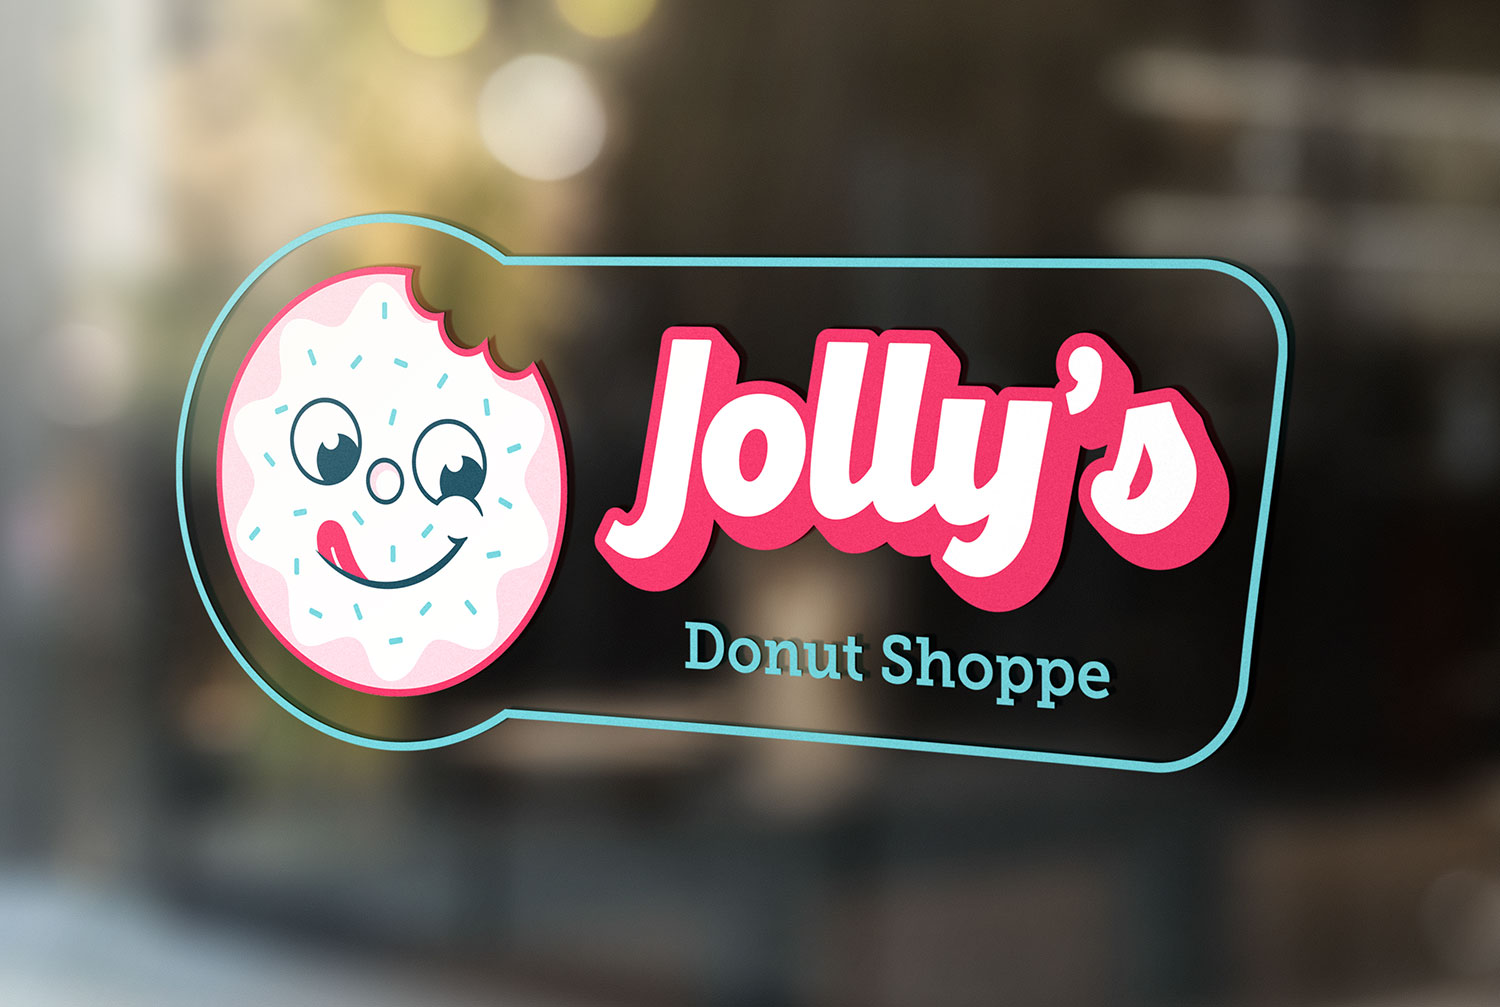 Jolly's Logo and Brand Identity Design Services by Sukalec Designs